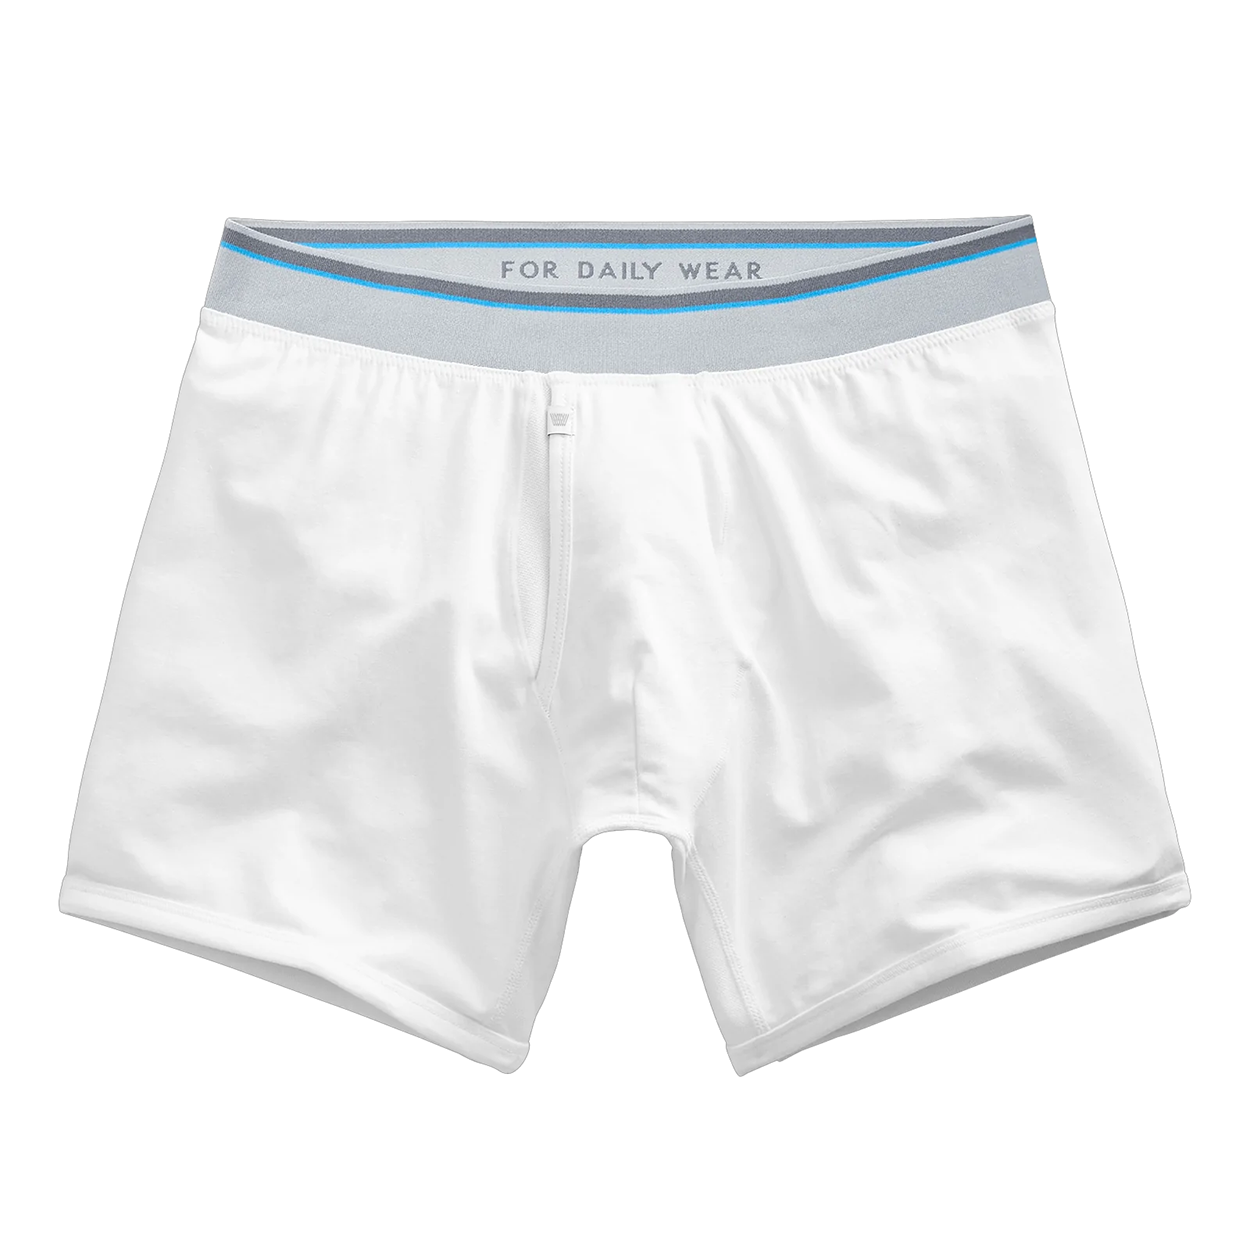 Mack Weldon - &quot;18-Hour Jersey&quot; Boxer Brief in Bright White